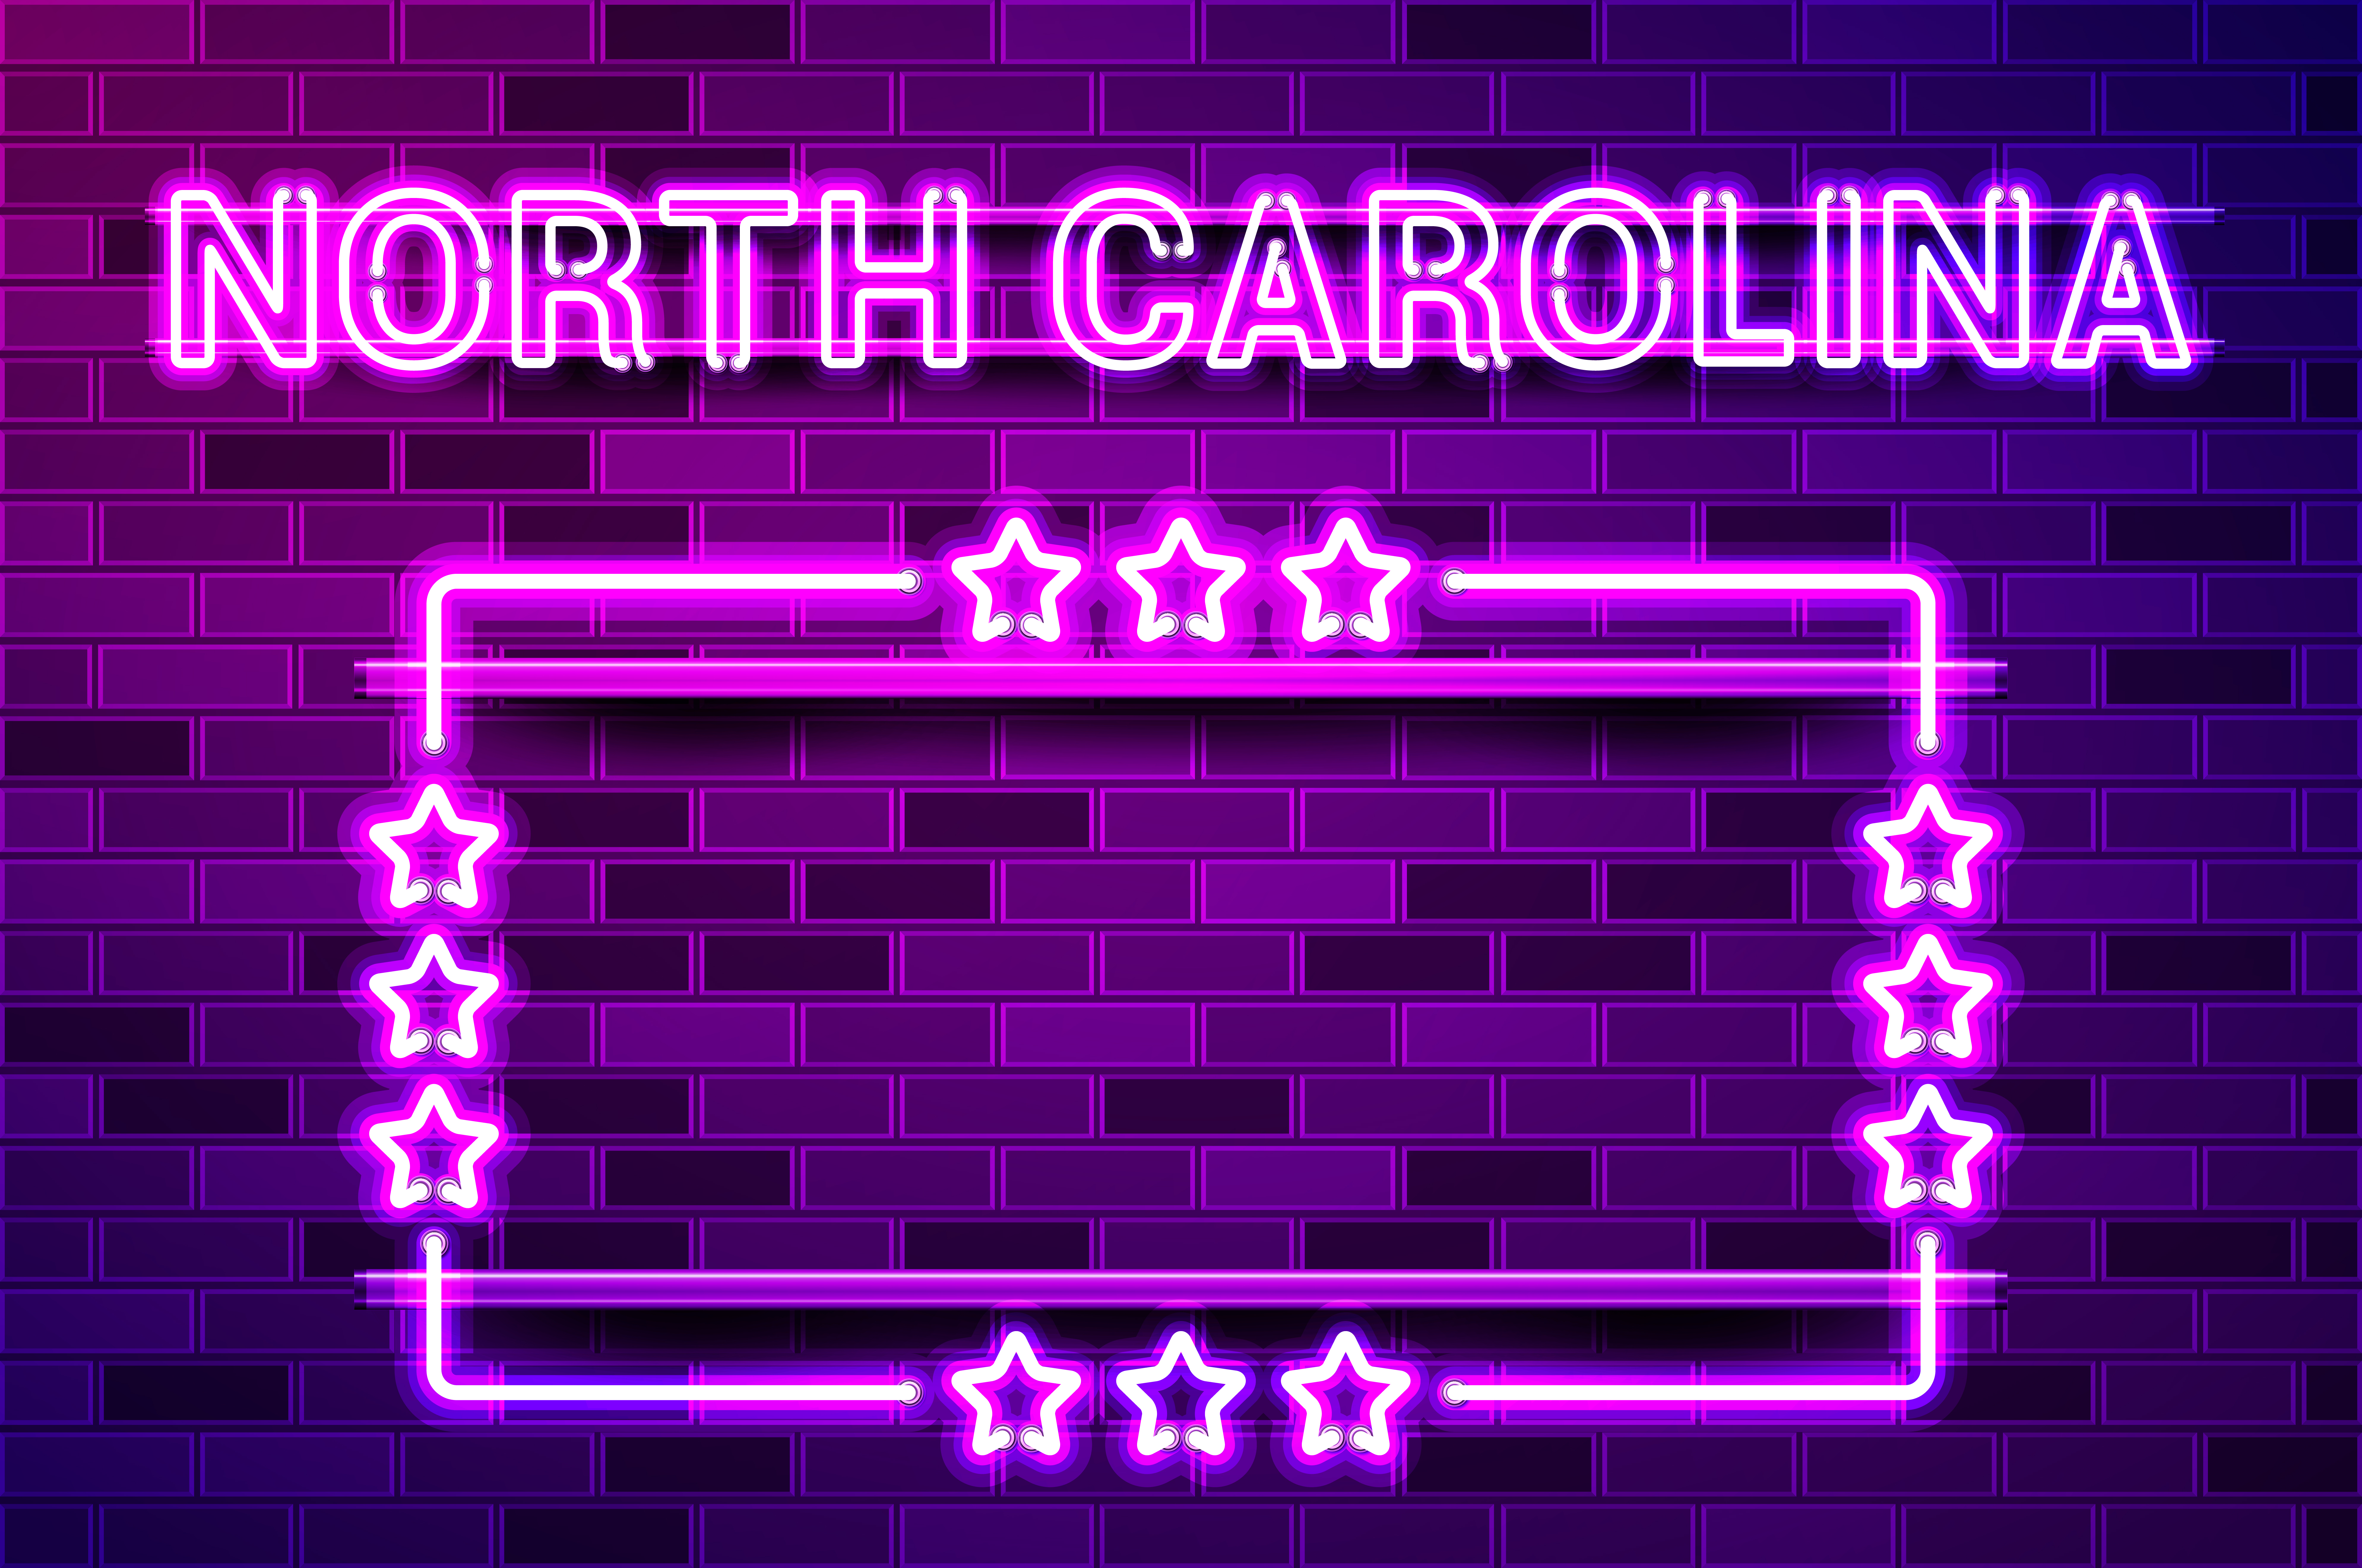 North Carolina US State glowing purple neon lettering and a rectangular frame with stars. Realistic vector illustration. Purple brick wall, violet glow, metal holders.. North Carolina US State glowing purple neon lettering and a rectangular frame with stars